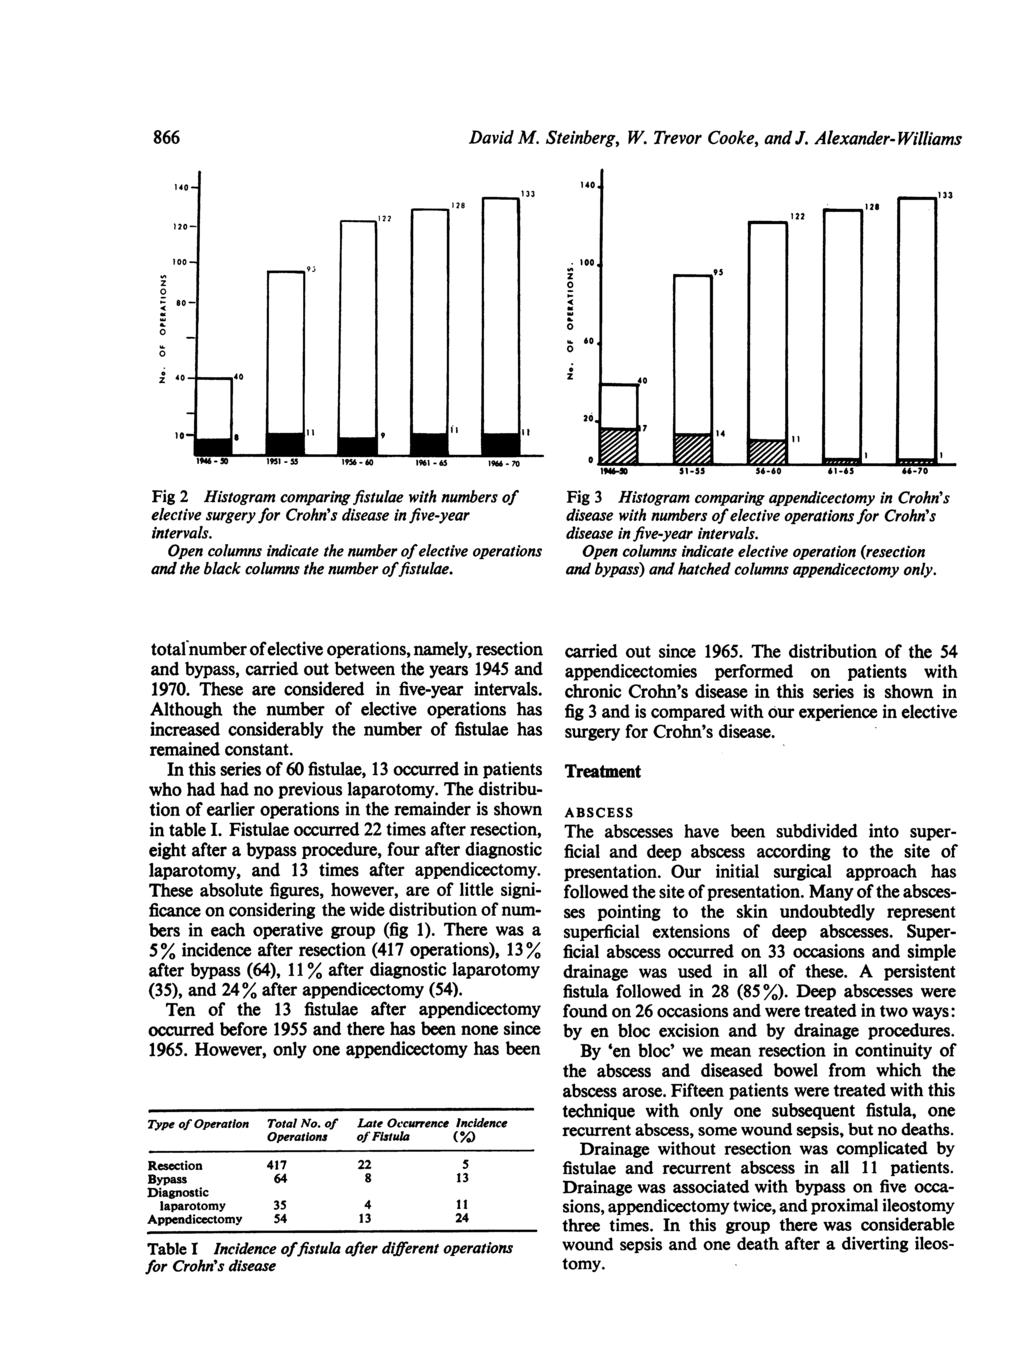 866 1 866 ~~~~~~~~David M. Steinberg, W. Trevor Cooke, and J. Alexander- Williams Fig 2 Histogram comparing fistulae with numbers of elective surgery for Crohn's disease in five-year intervals.